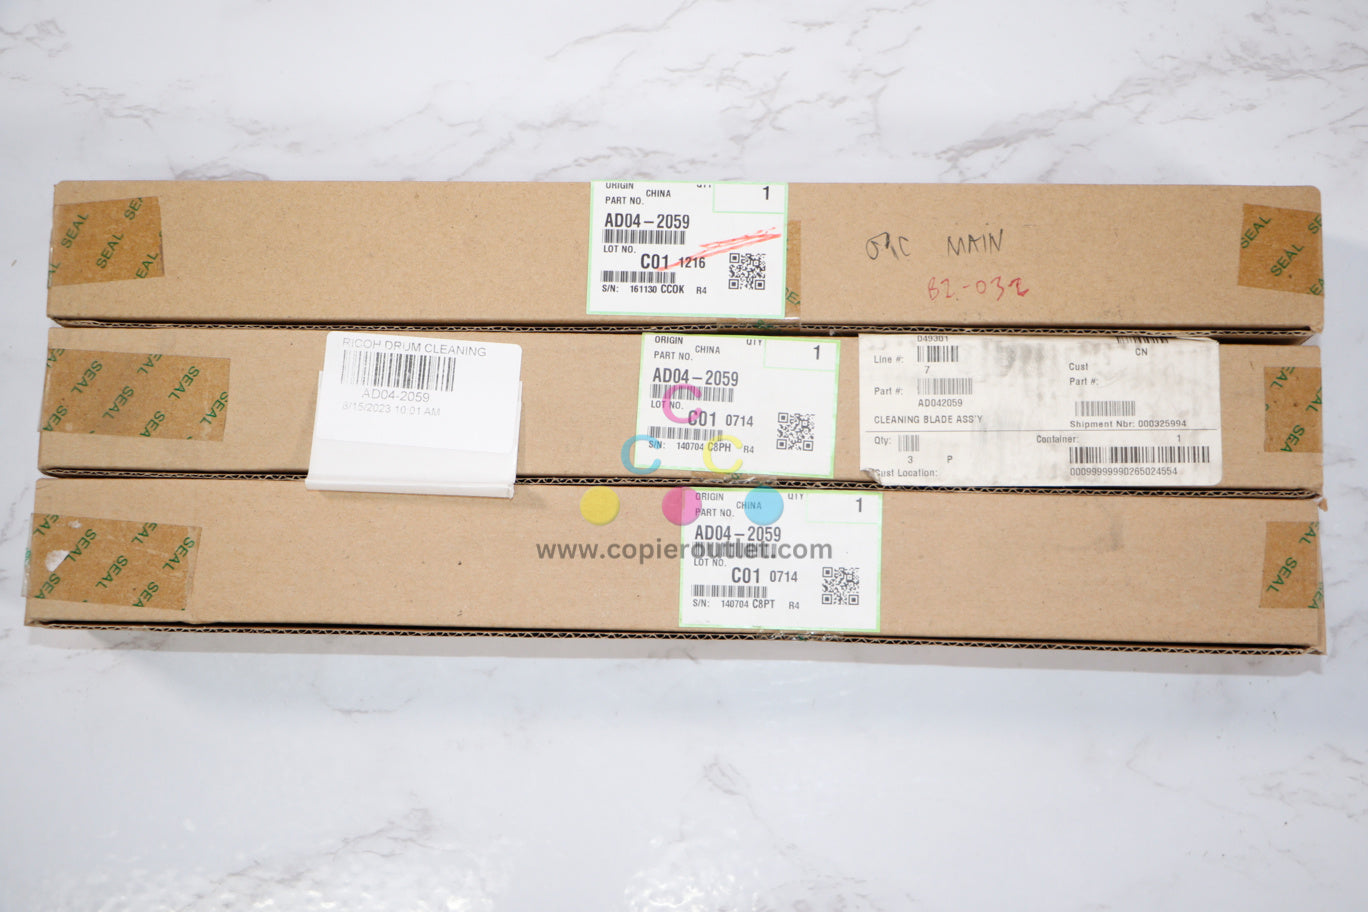 3 OEM Ricoh MP1600,2015,2016,2018 Drum Cleaning Blades AD04-2059 (AD042059)